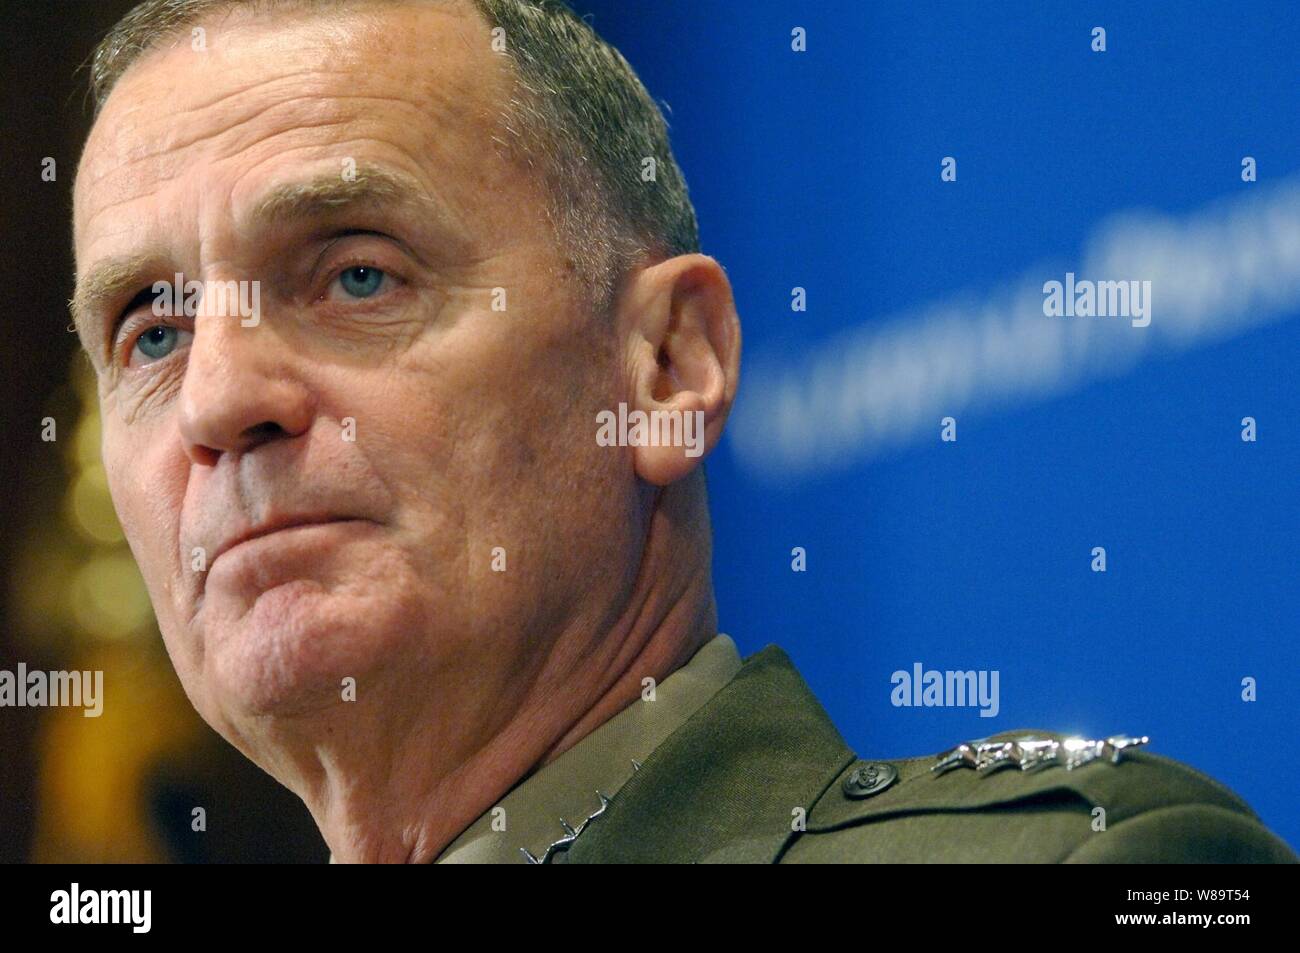 Supreme Allied Commander, Europe and the Commander of the U.S. European Command Gen. James L. Jones, U. S. Marine Corps, listens to a question during a luncheon at the National Press Club in Washington, D.C., on May 25, 2006.  Jones spoke to members on the theme of 'NATO: New Capabilities for Emerging Global Challenges,' and the war on terror. Stock Photo